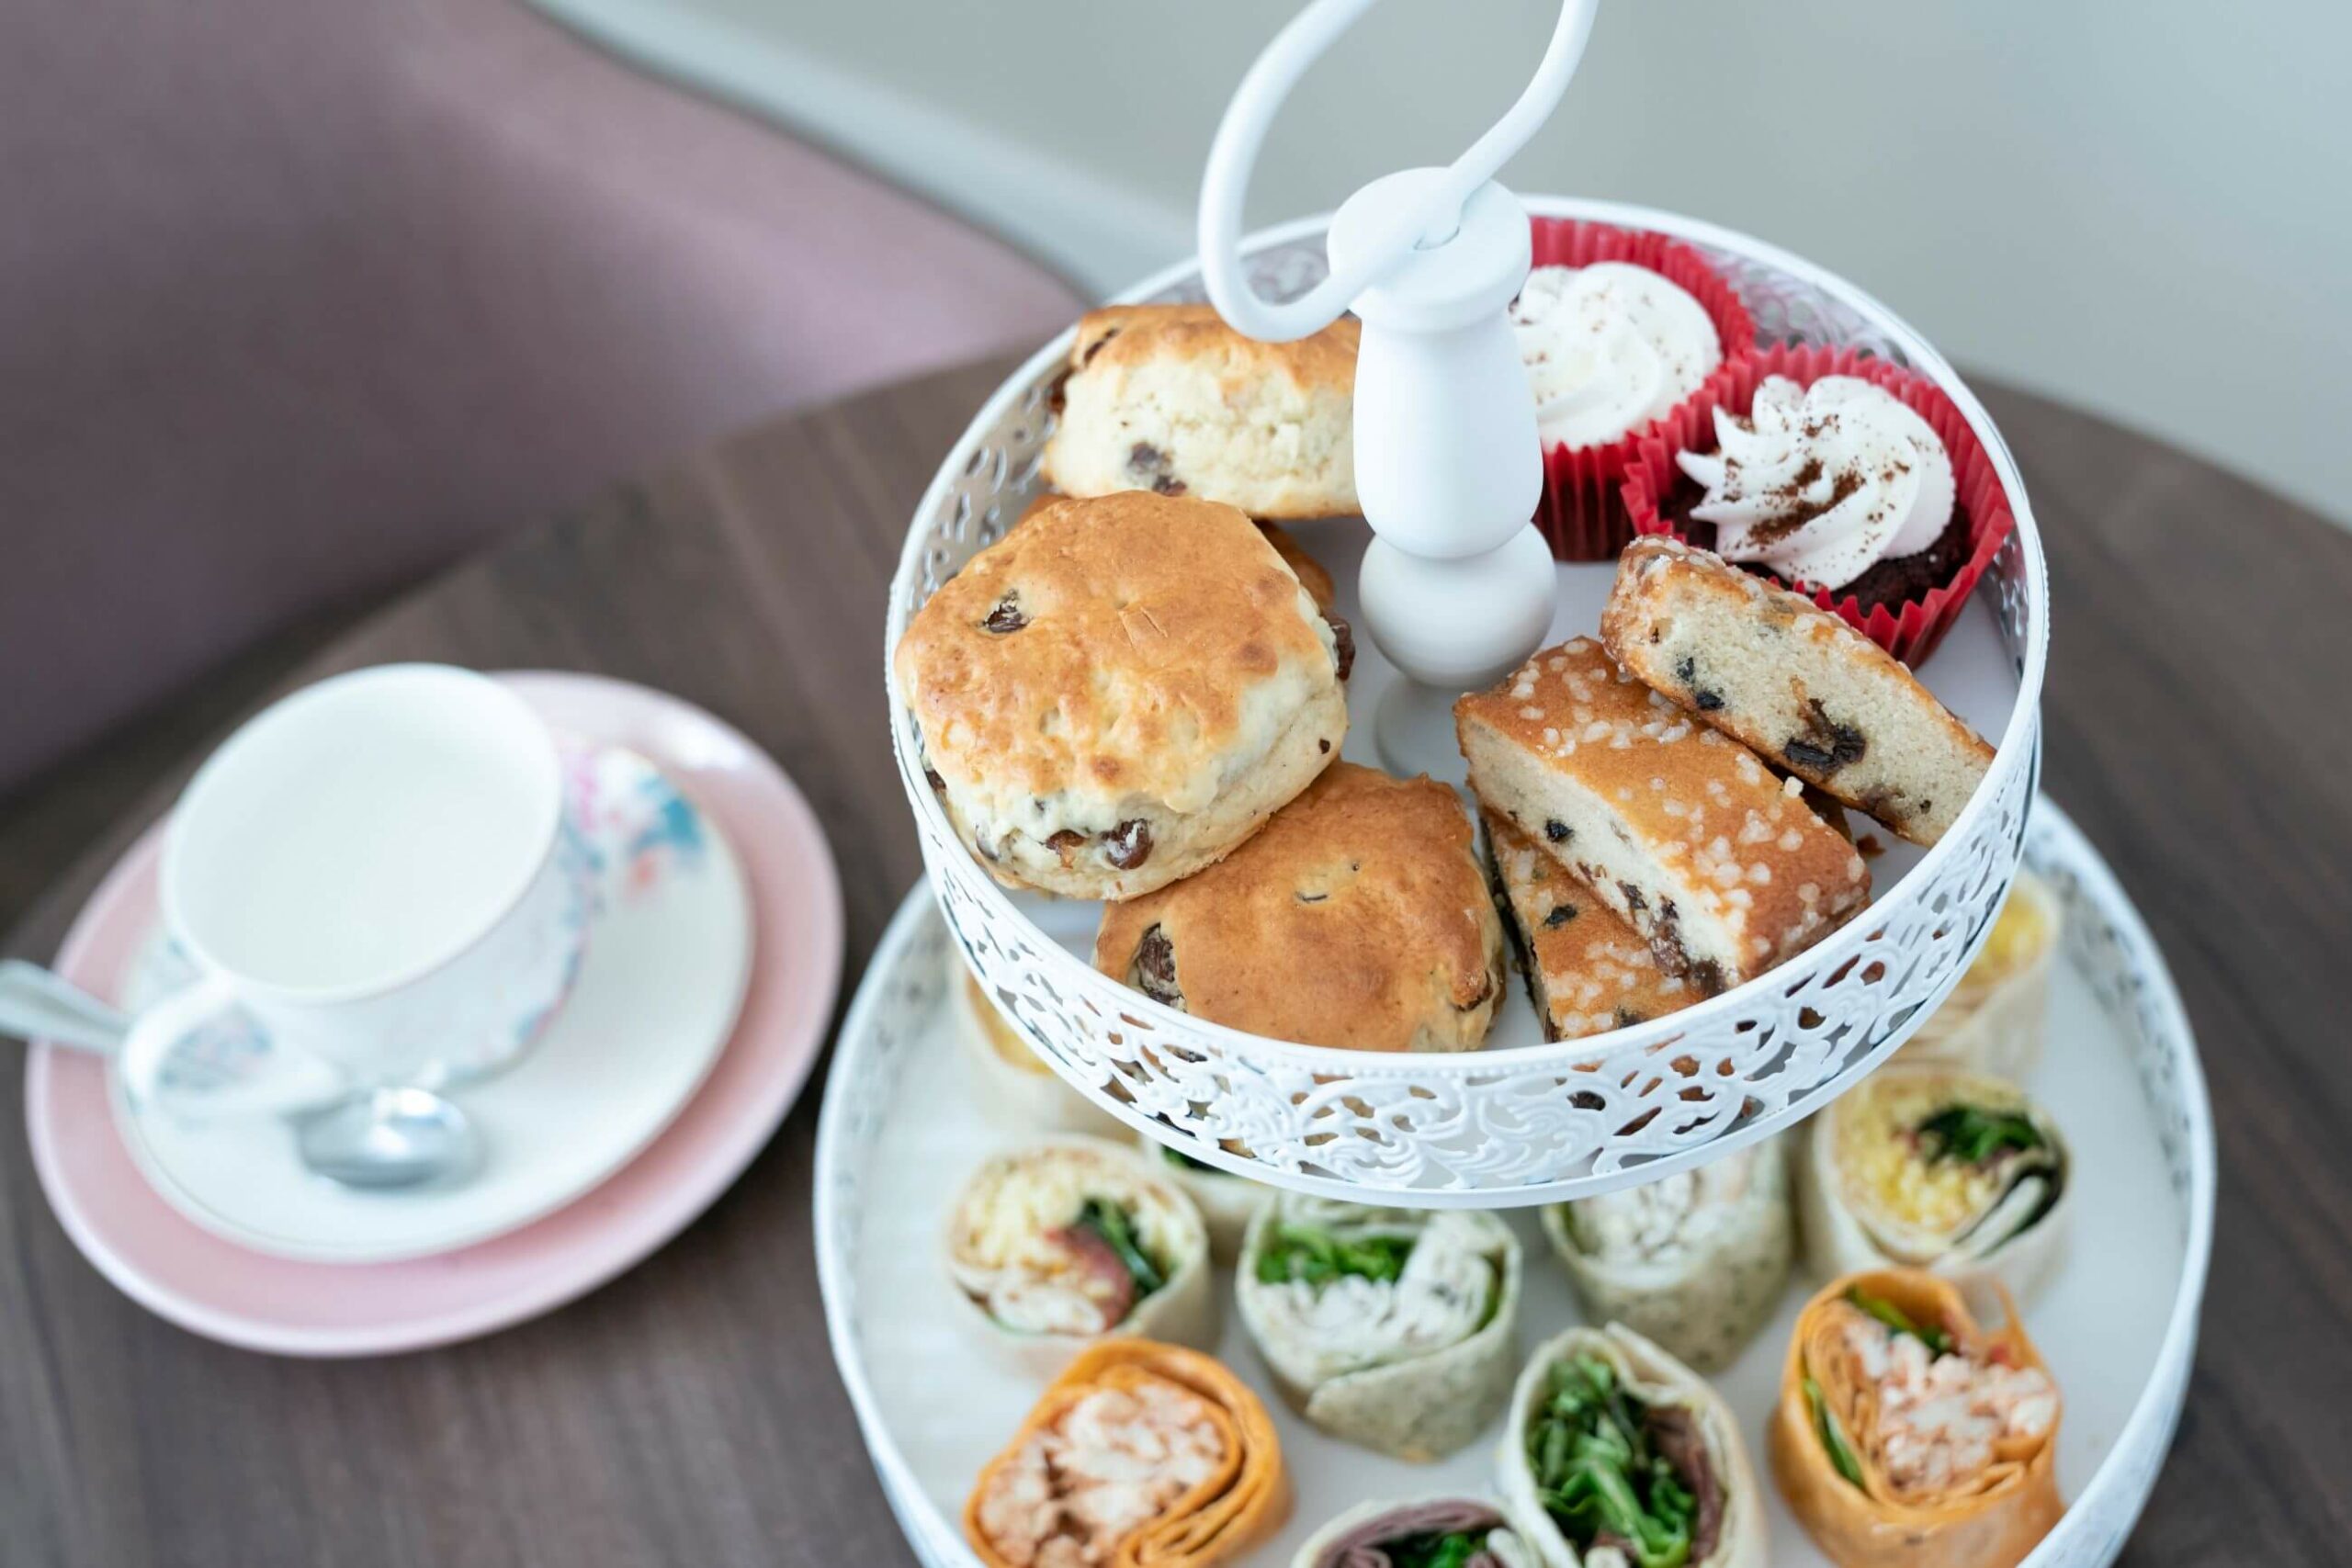 Afternoon tea at White House Care Home